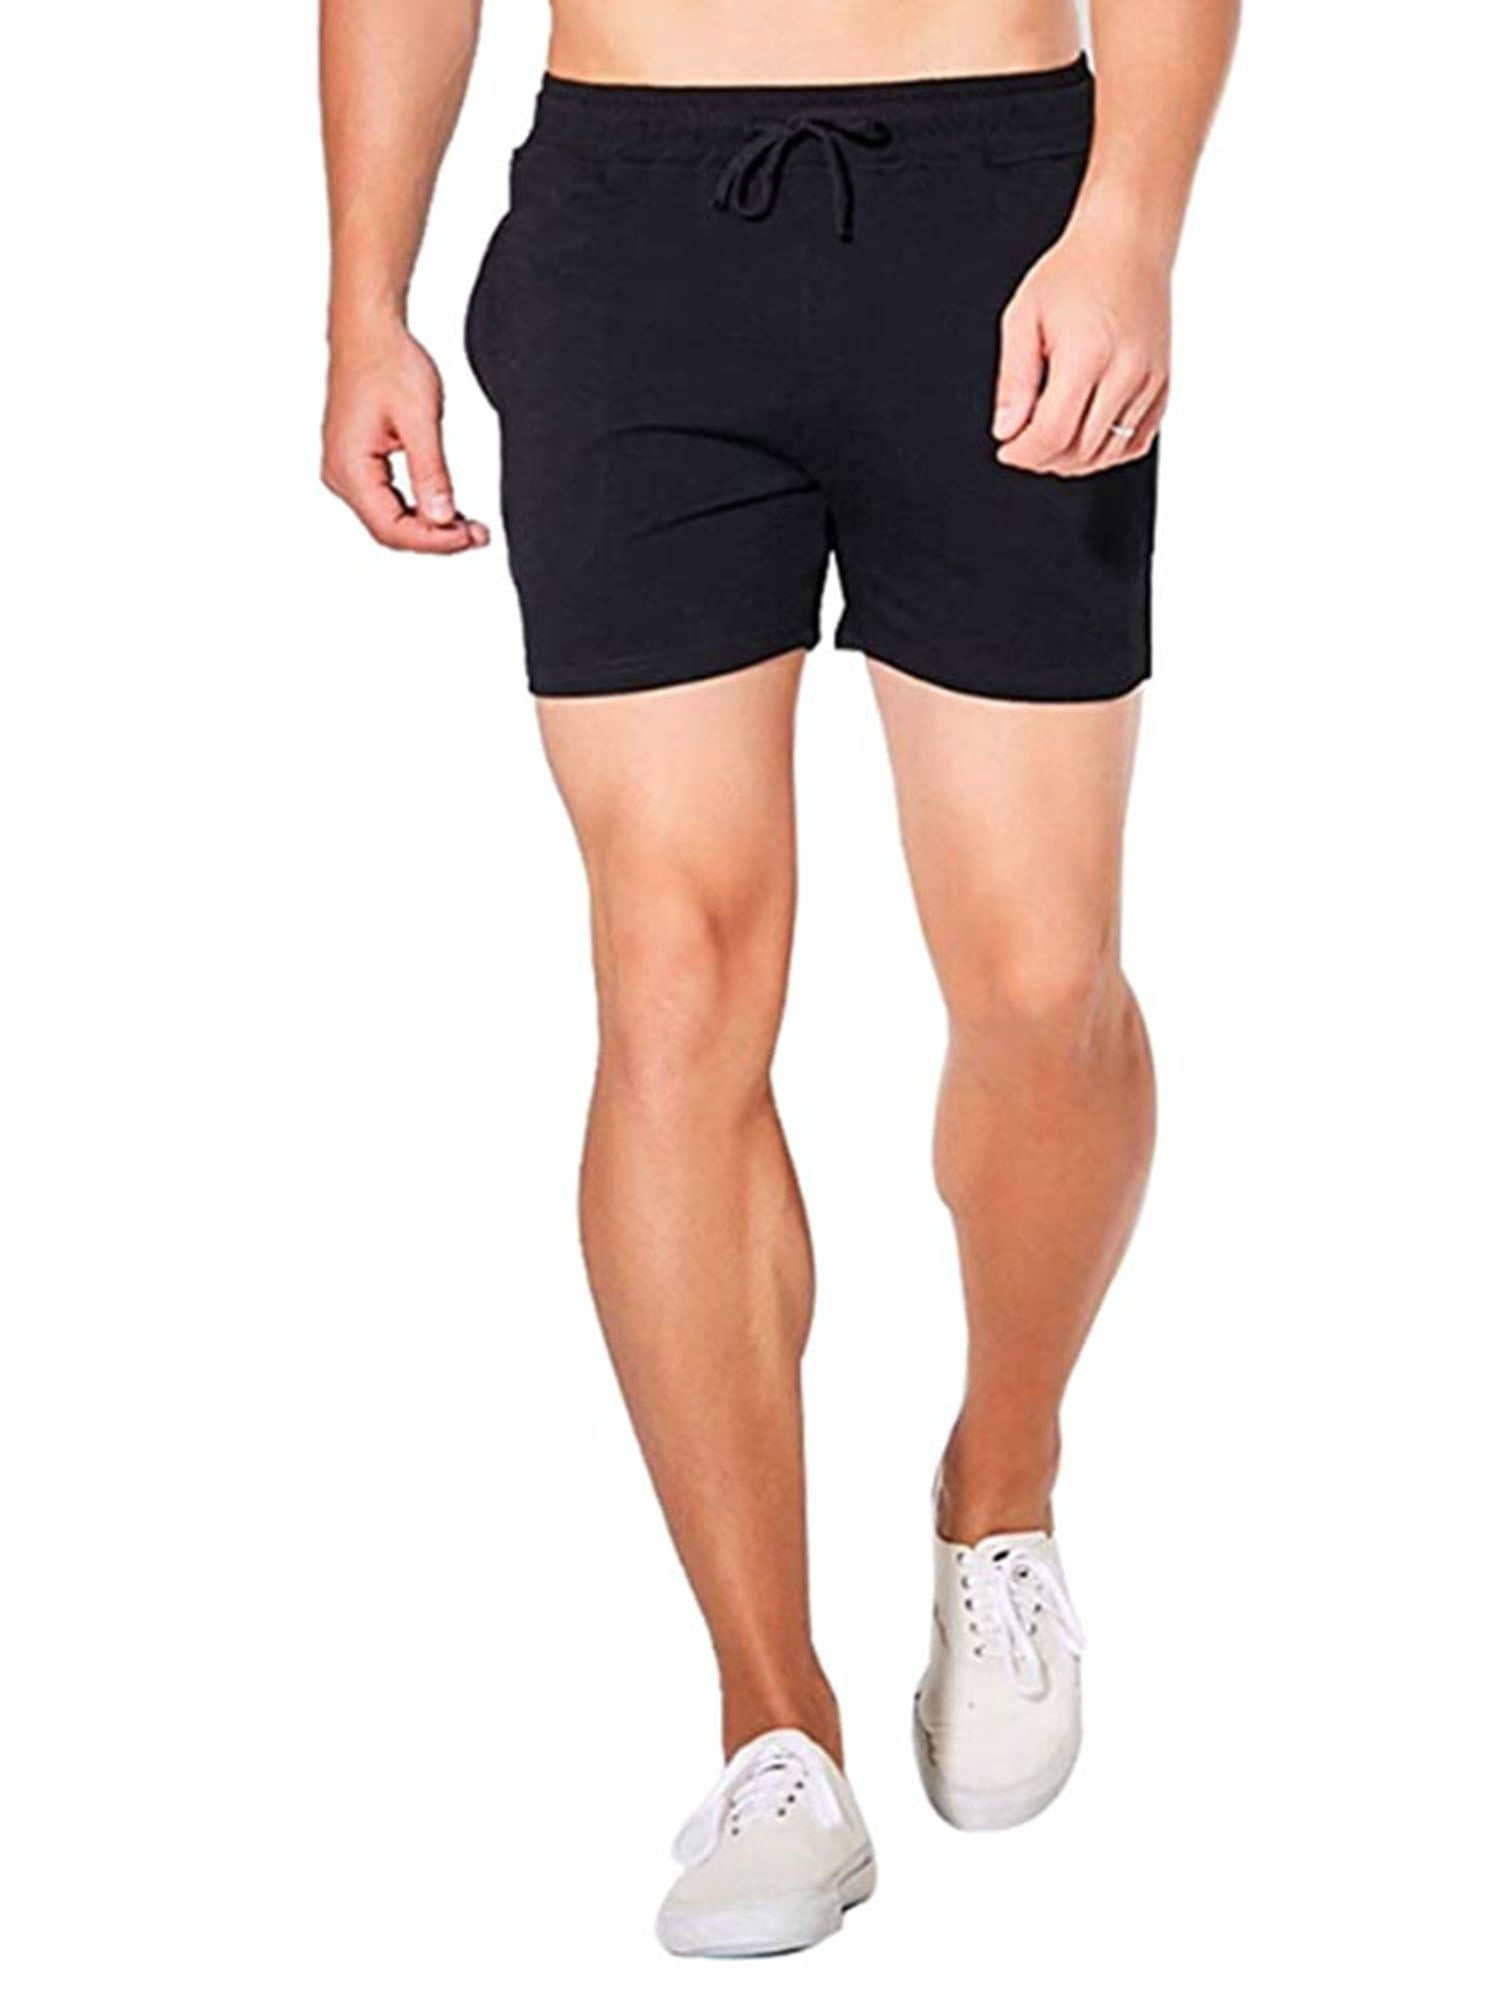 Mens Athletic Workout Running Shorts with Drawstring Solid Lightweight Quick Dry Beach Swim Joggers Sweat Shorts